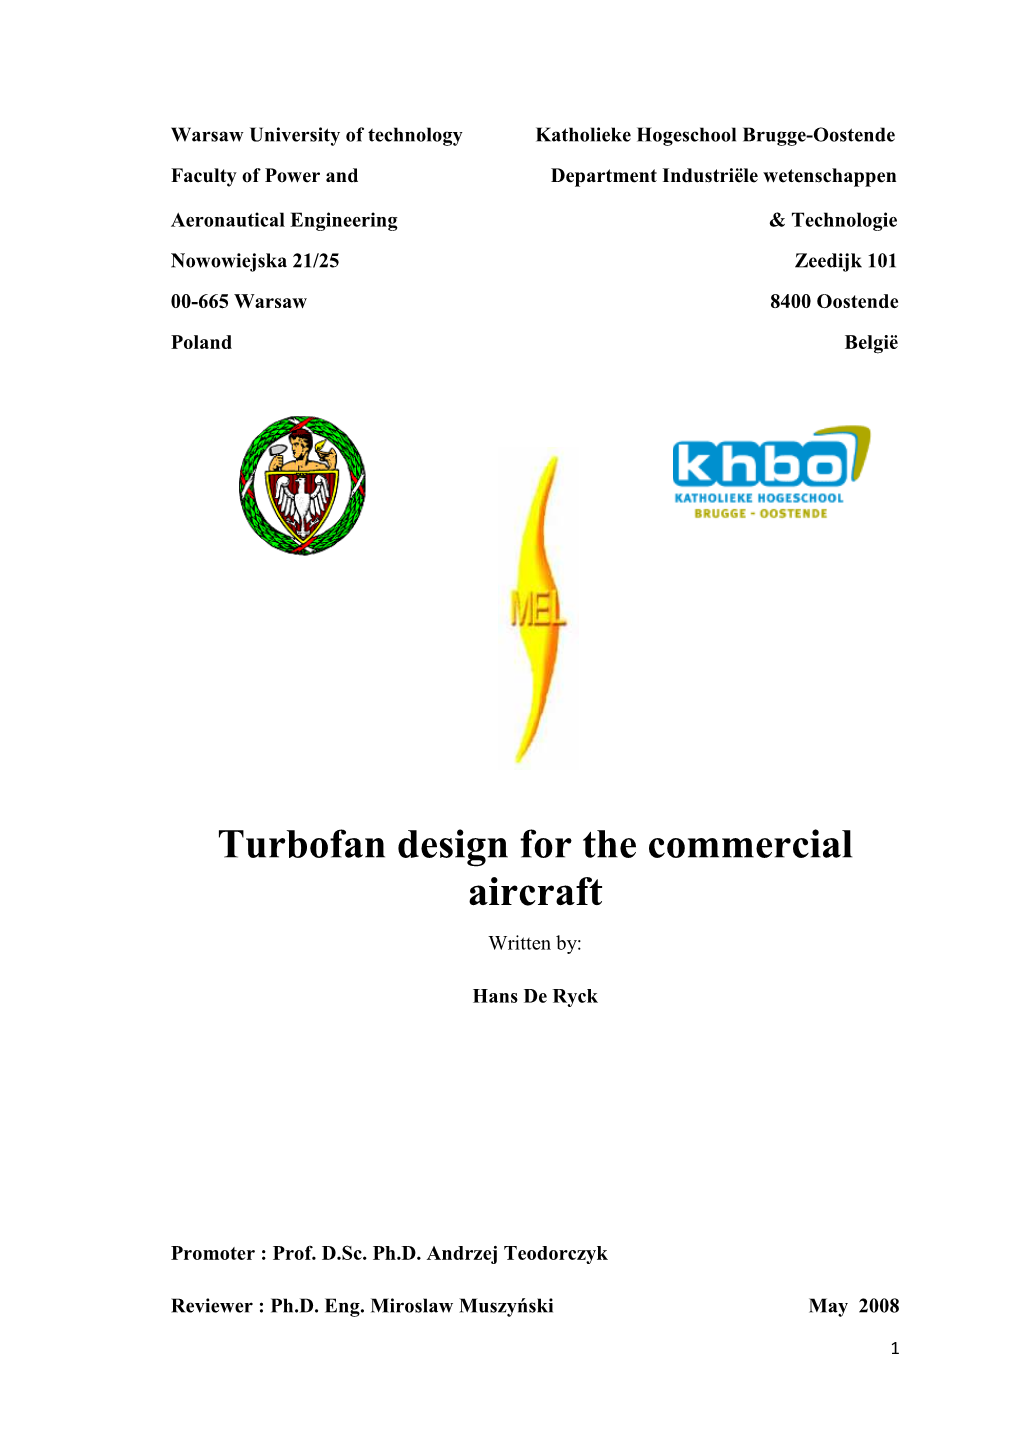 Turbofan Design for the Commercial Aircraft Final HOME2